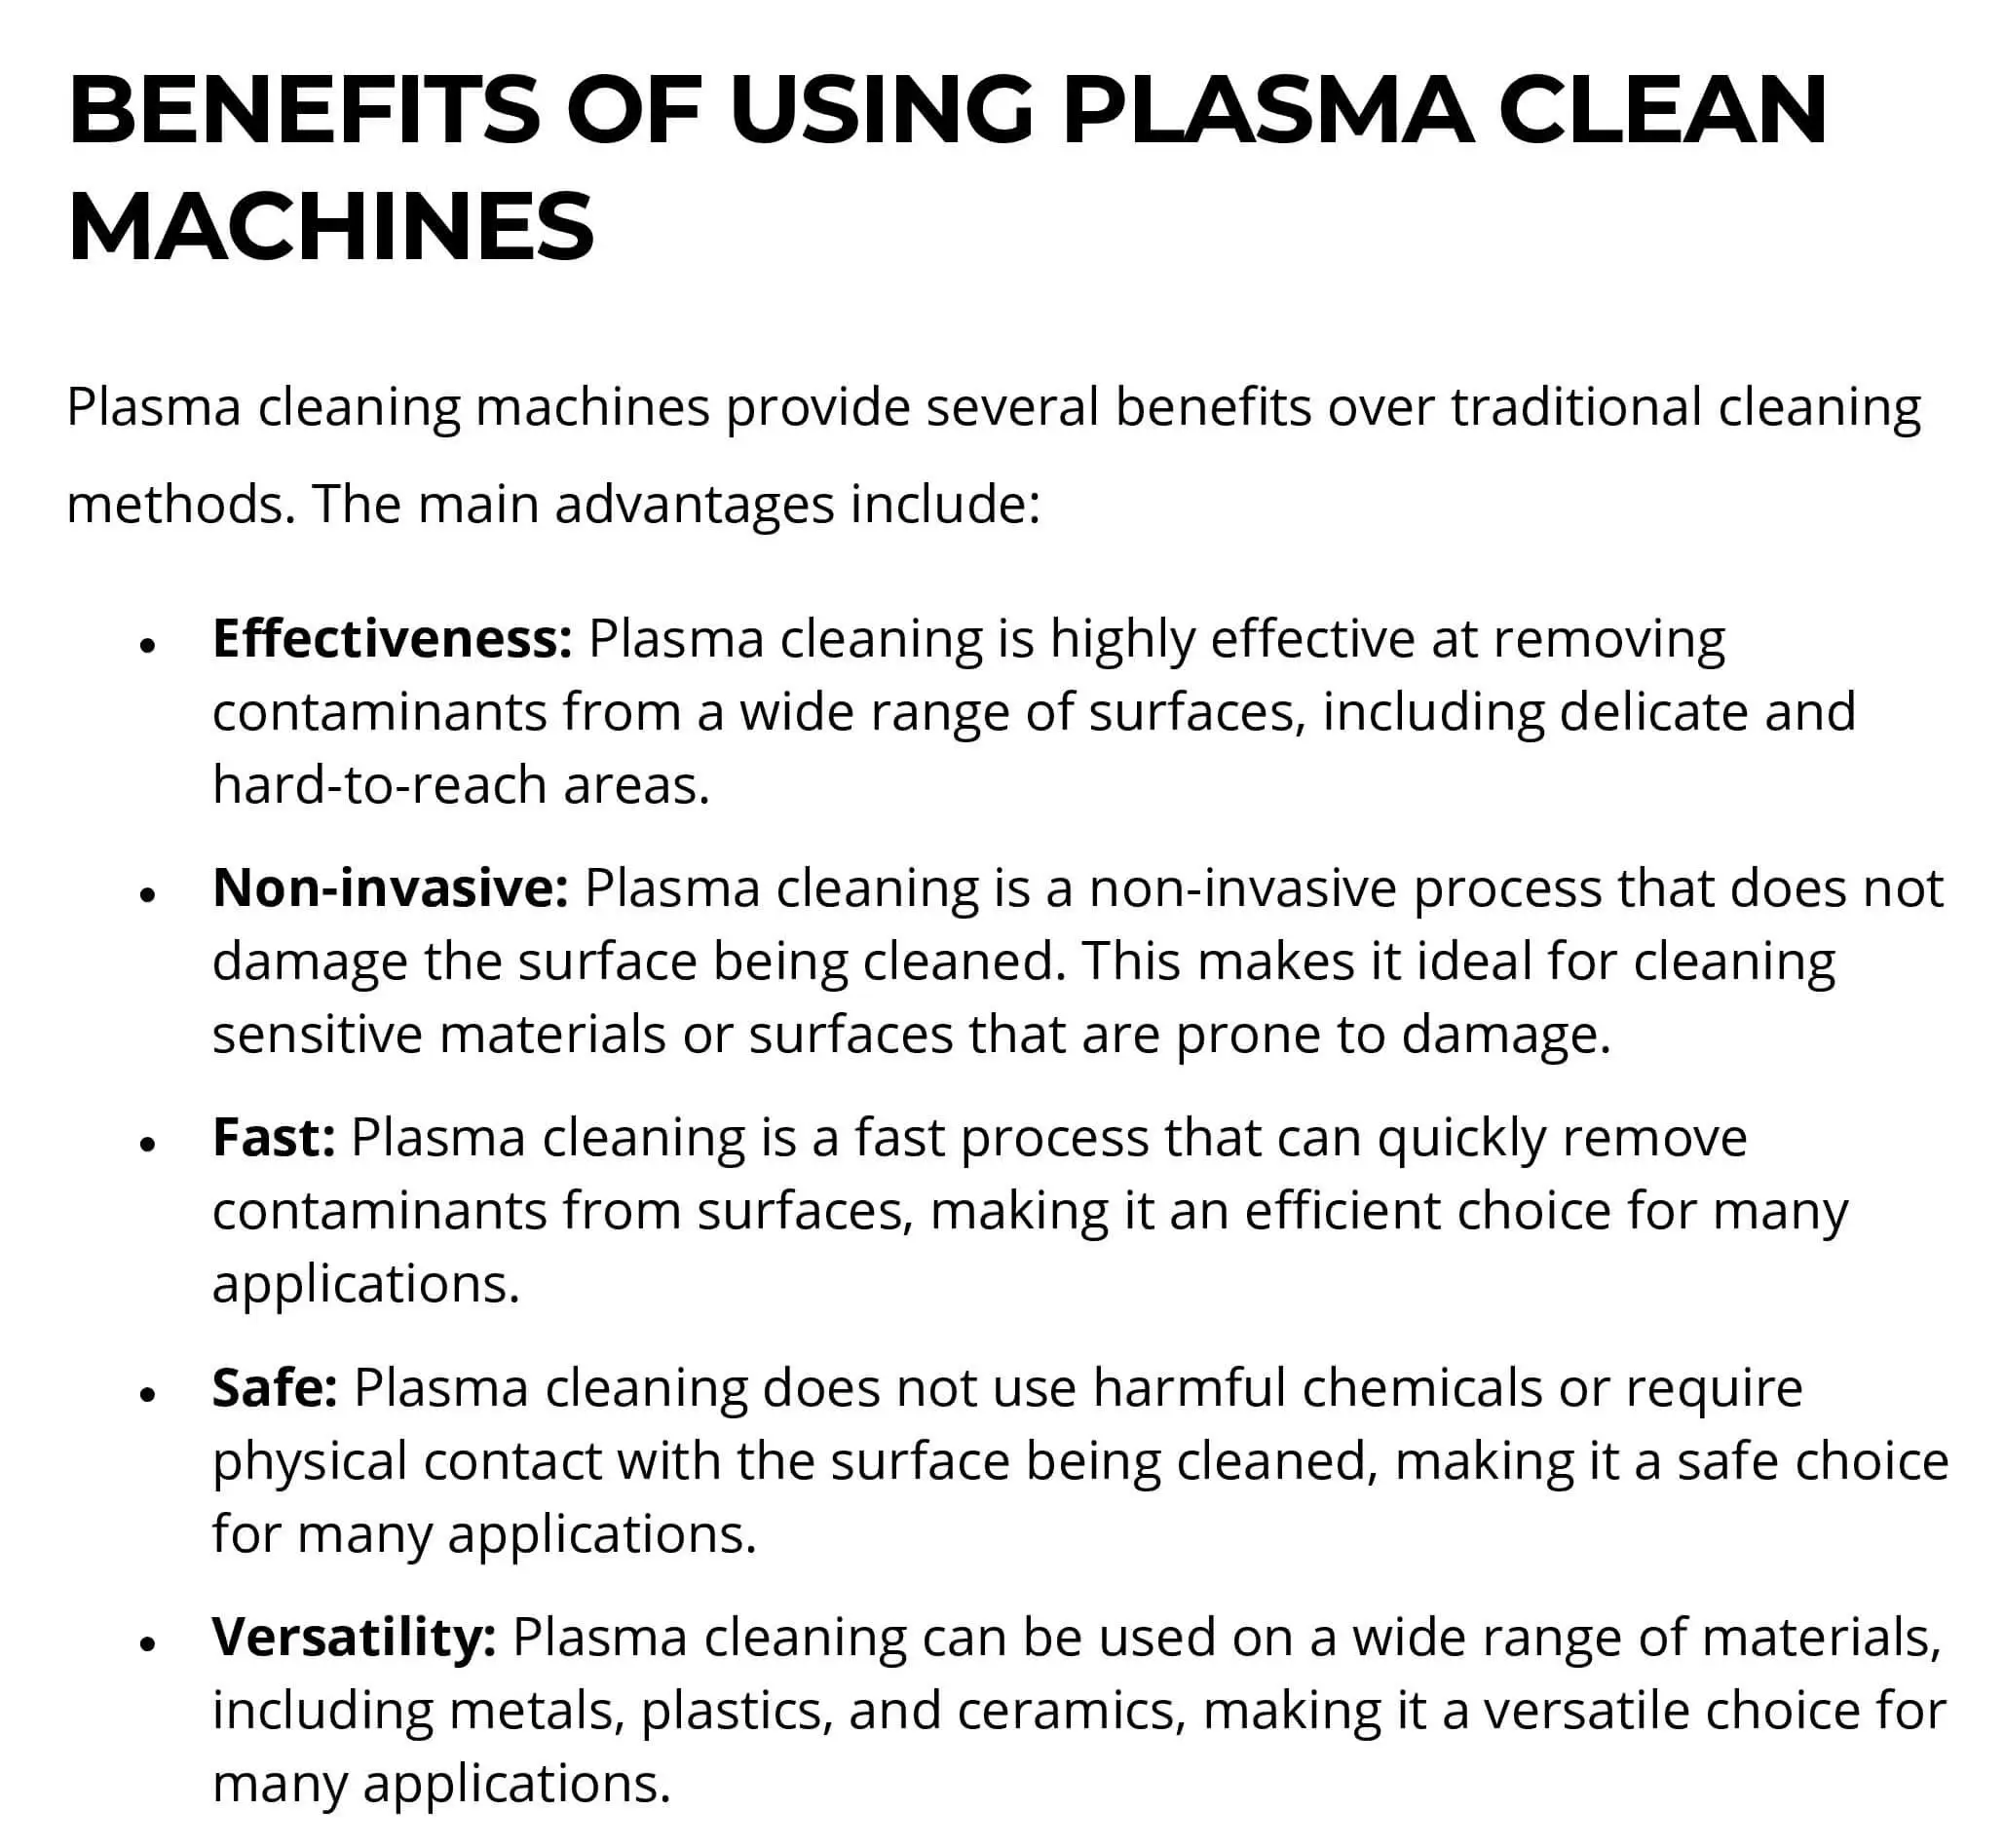 What Are the Environmental Benefits of Using Plasma Cleaning Over Traditional Methods?